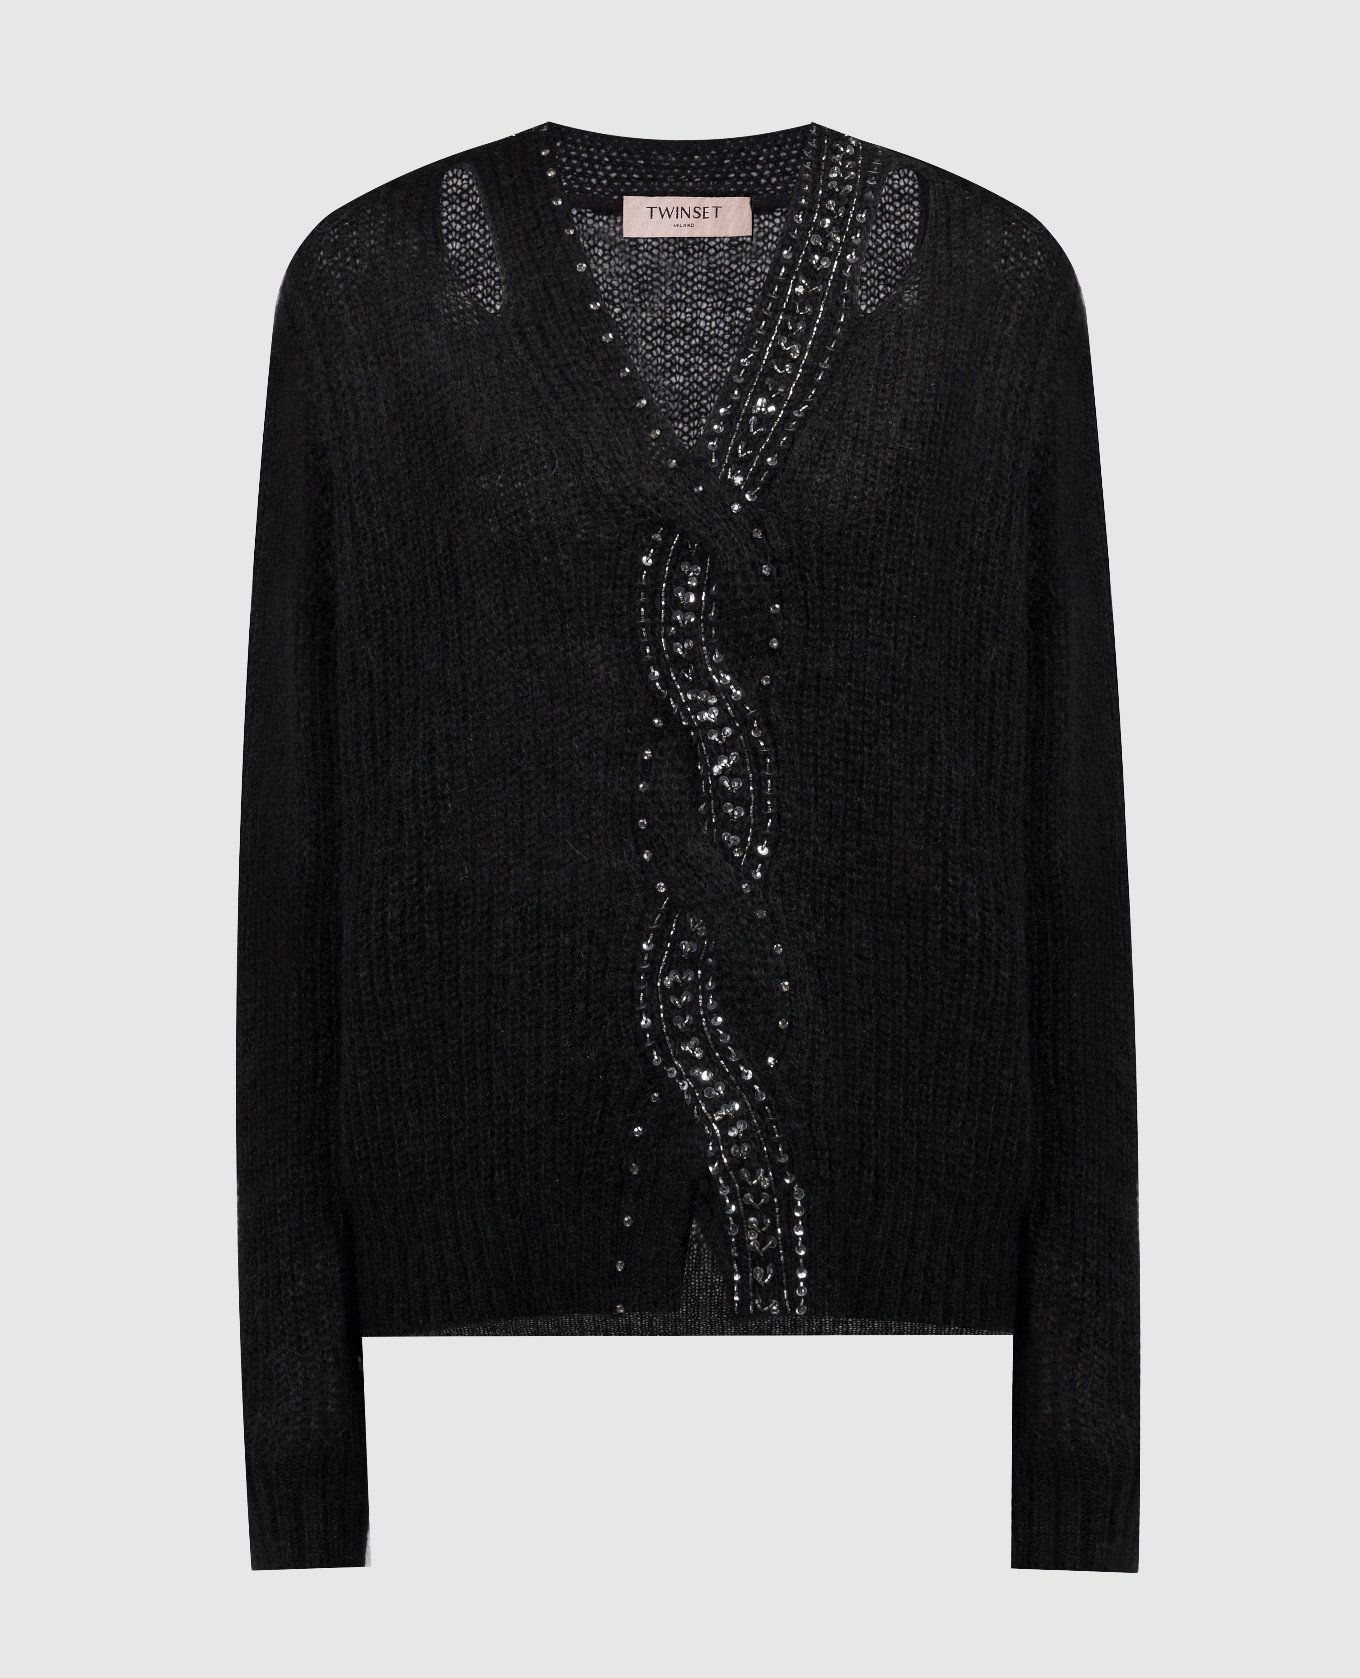 Black sweater with crystals and sequins